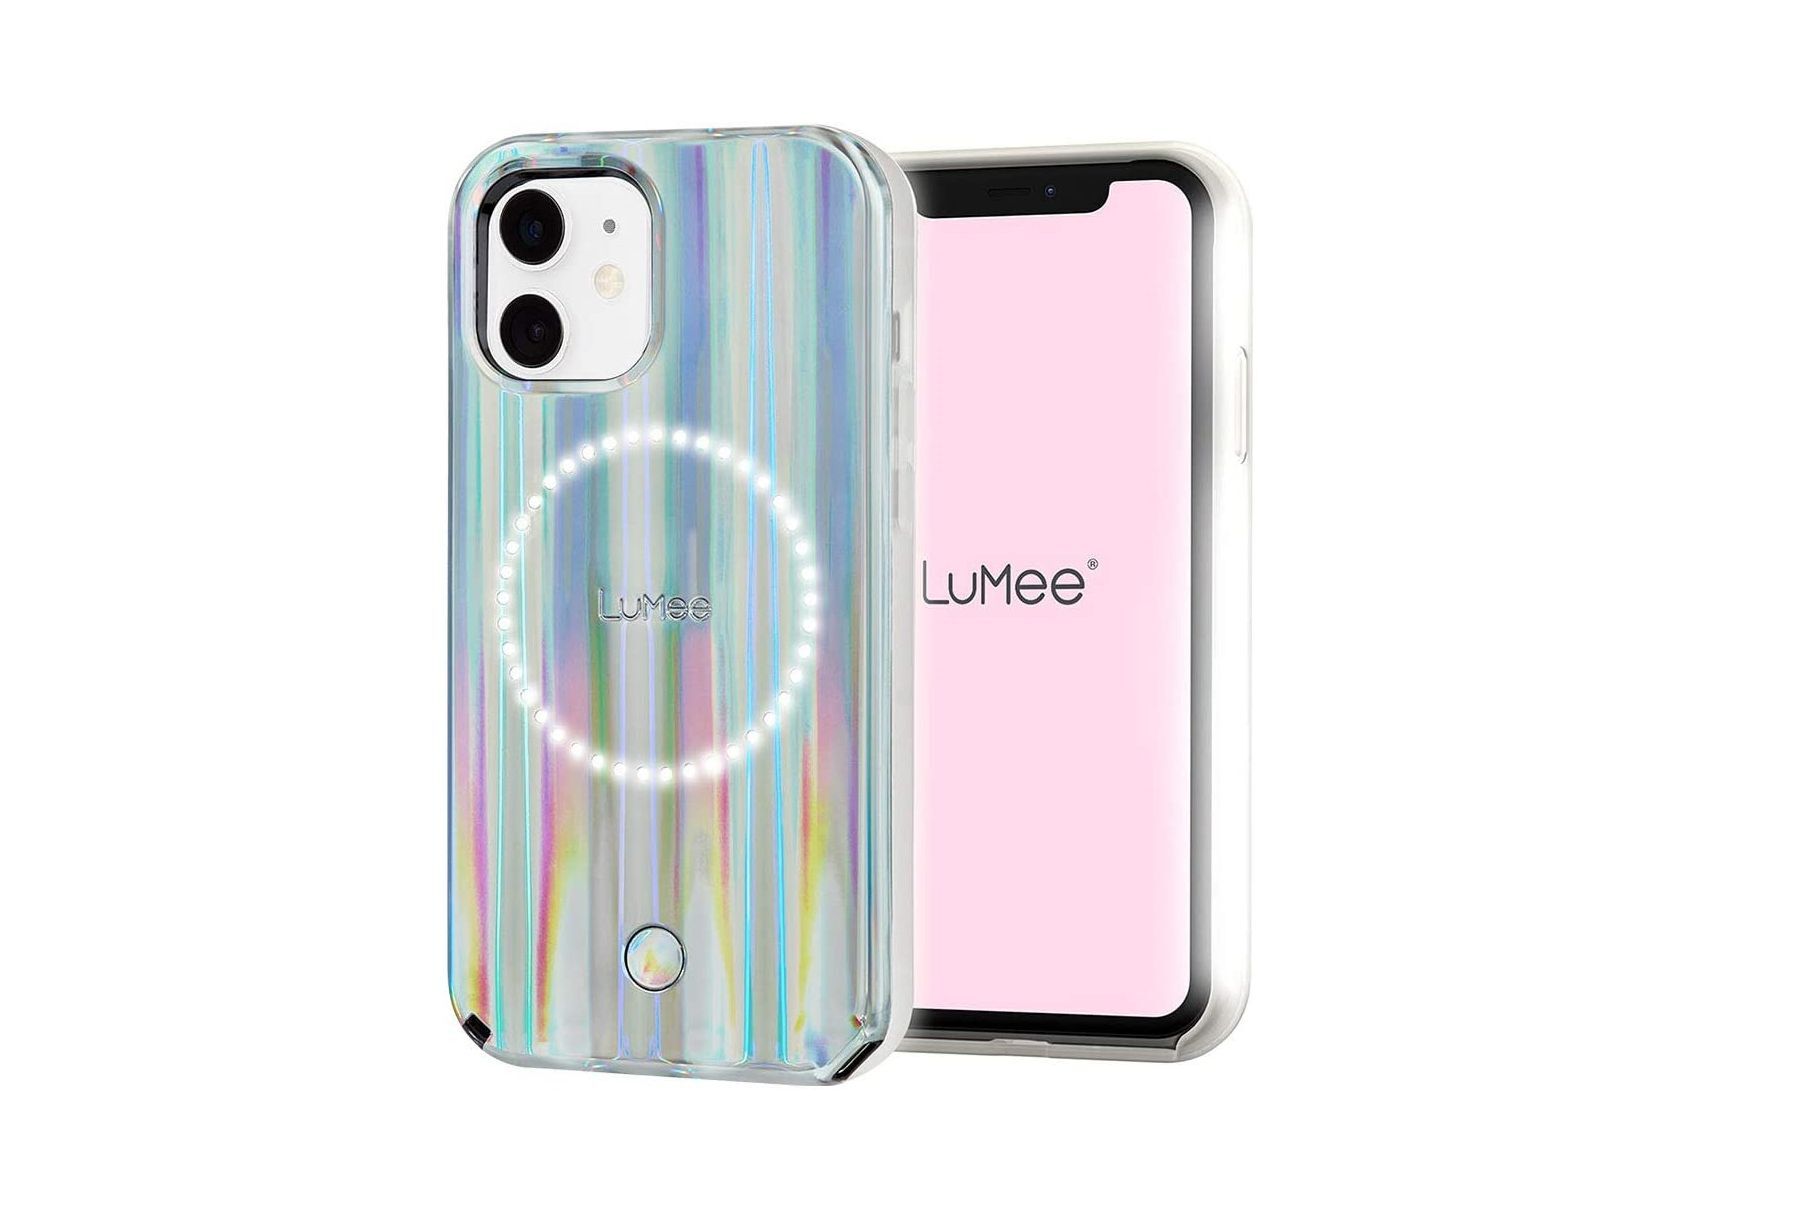 LuMee Halo by Case-Mate iPhone 12 mini case - The best iPhone 12 mini cases you can get - updated July 2022